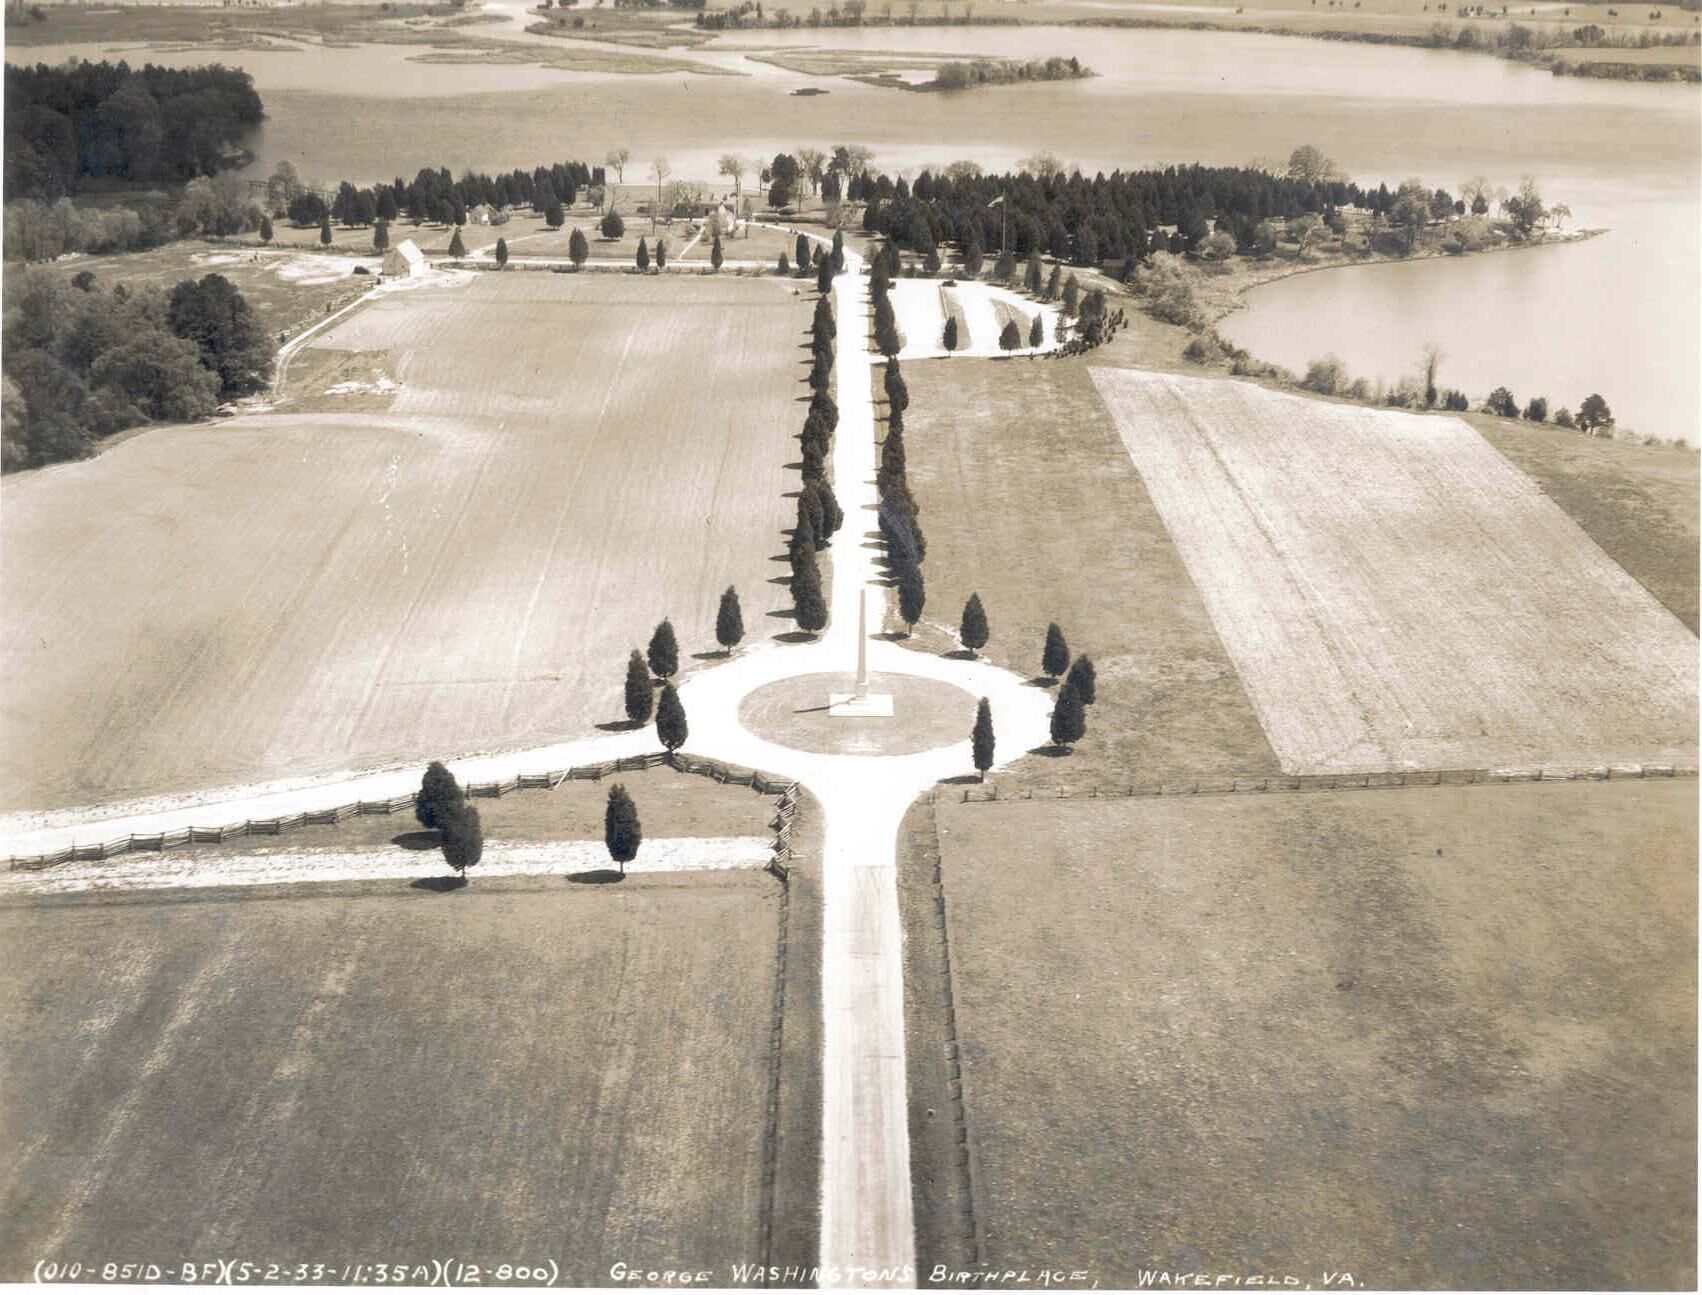 Aerial image of the Birthplace Monument